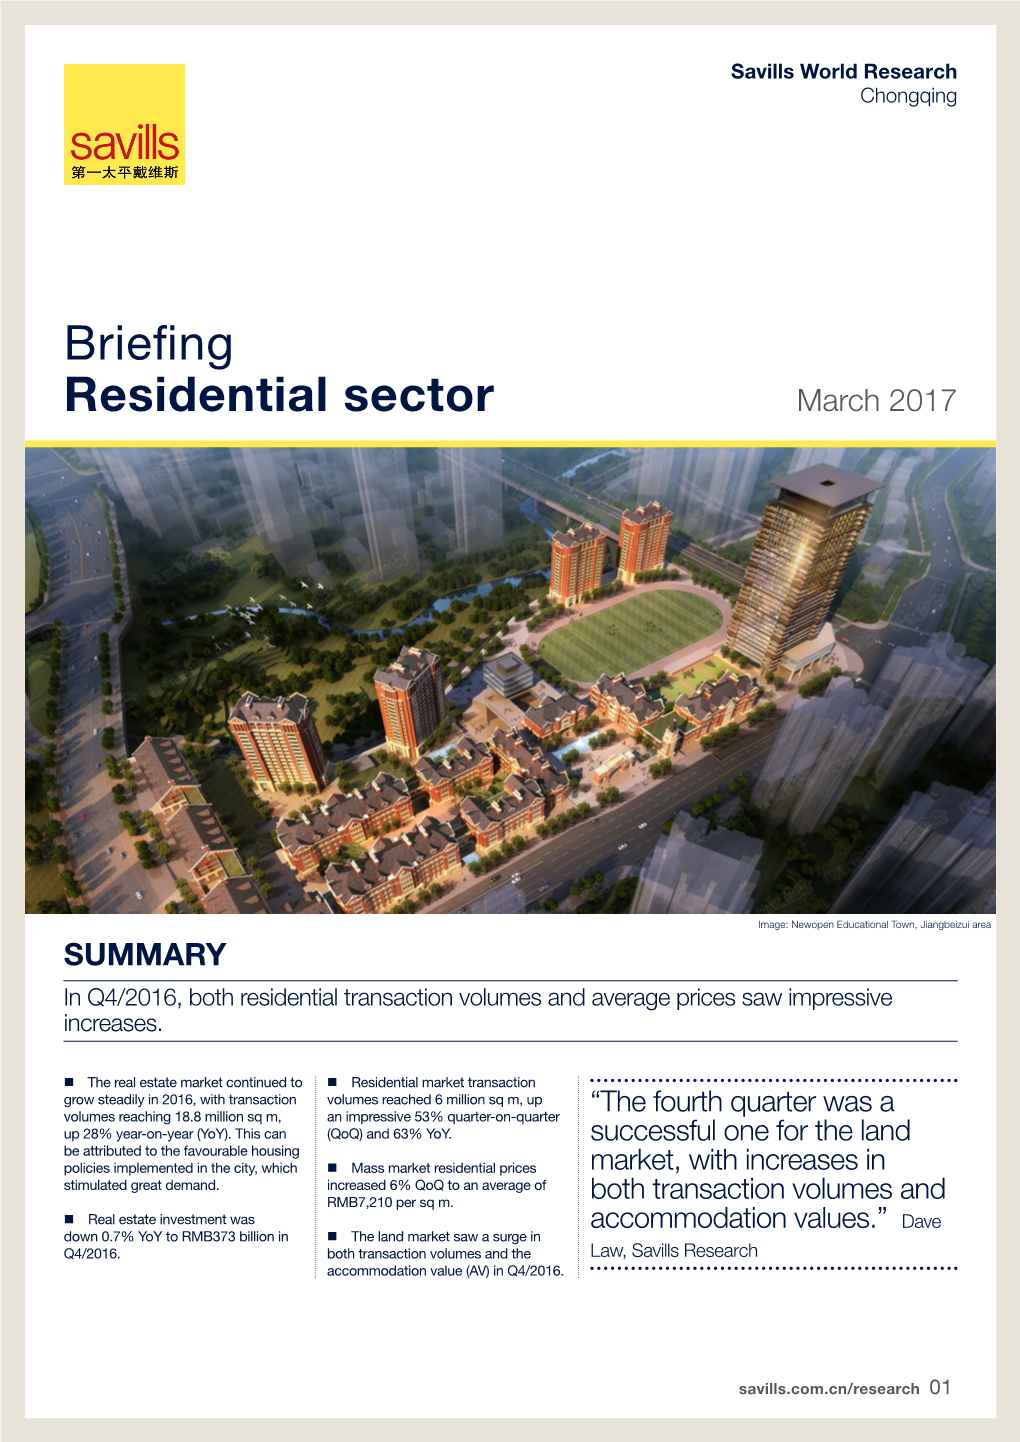 Briefing Residential Sector March 2017